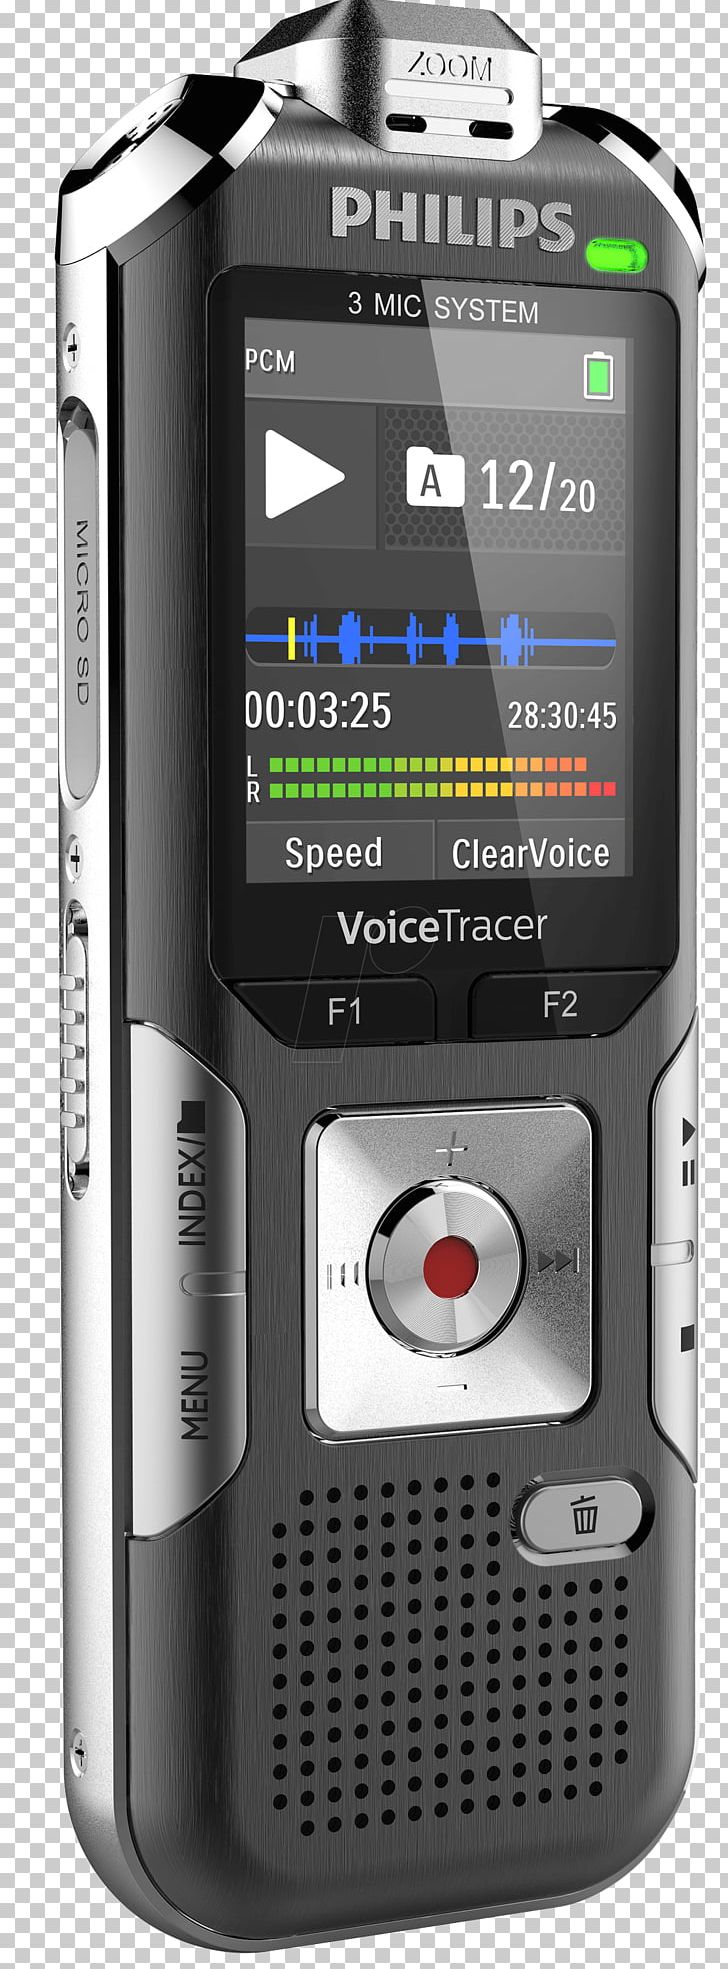 Microphone Digital Audio Dictation Machine Philips Sound PNG, Clipart, Cellular Network, Digital Audio, Electronic Device, Electronics, Gadget Free PNG Download